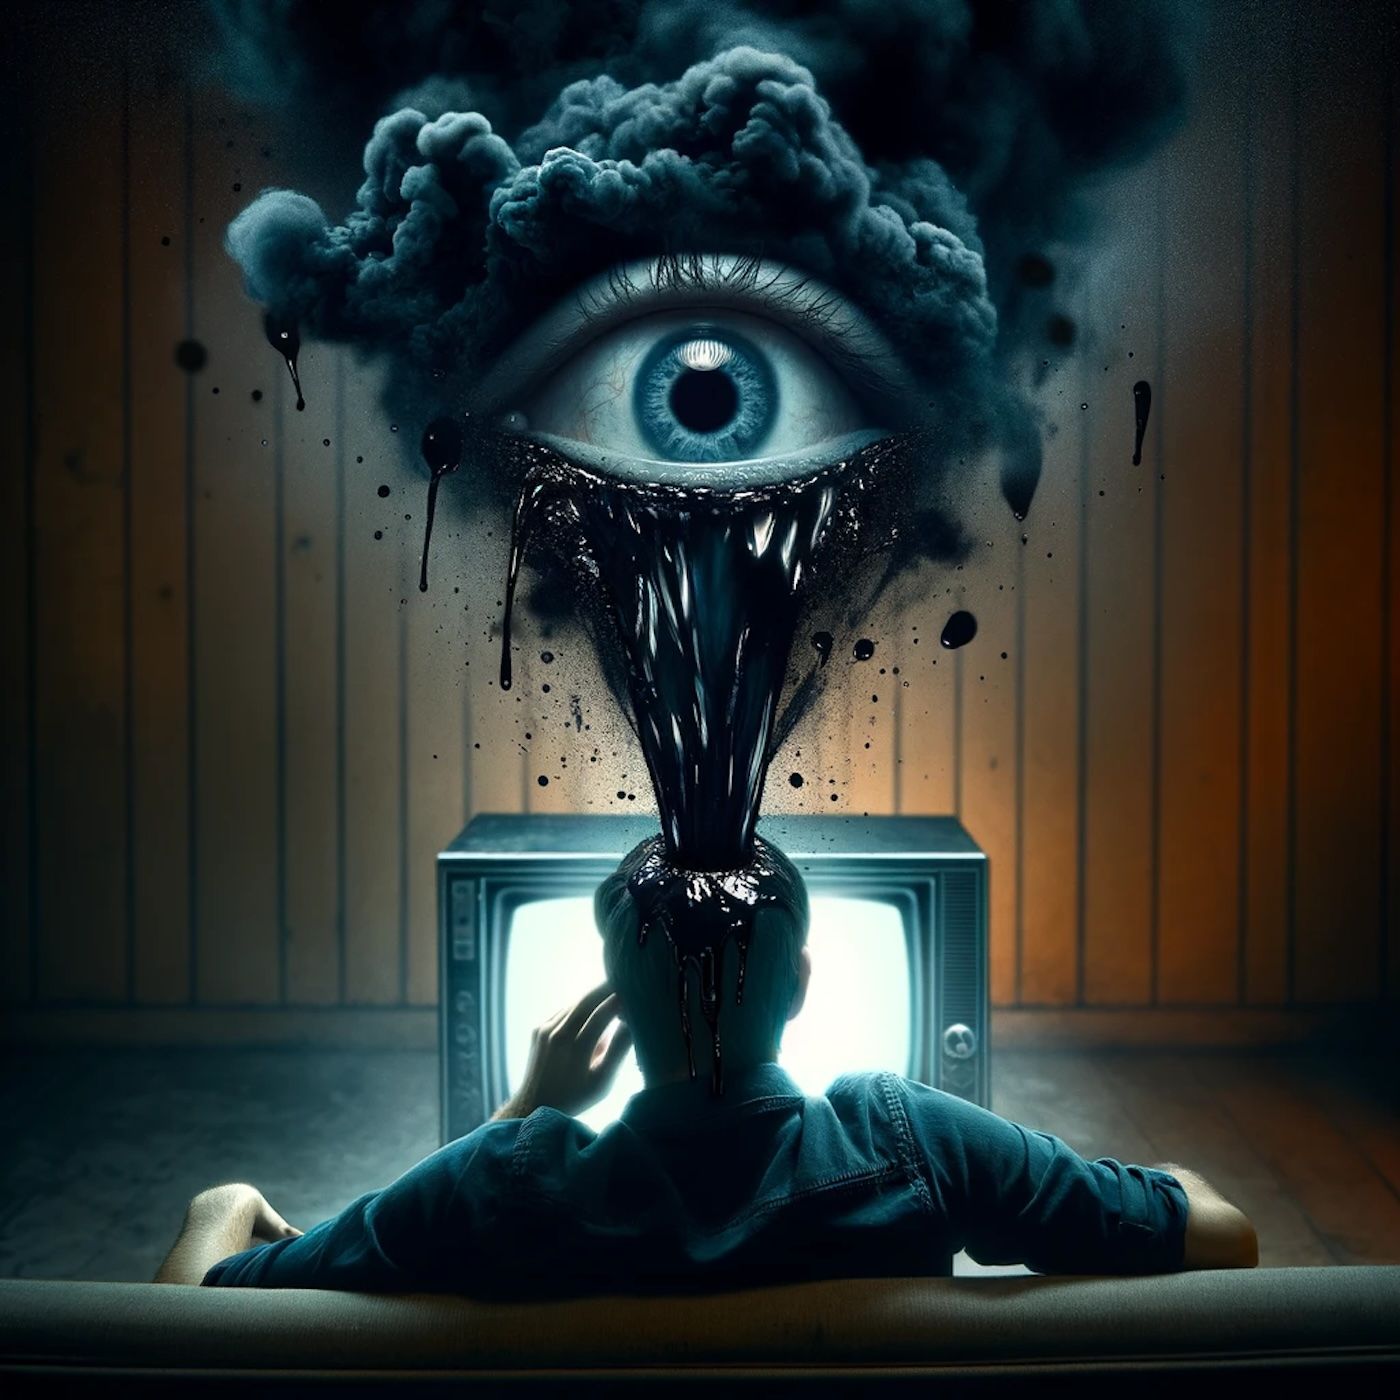 "Watching television is like taking black spray paint to your third eye."